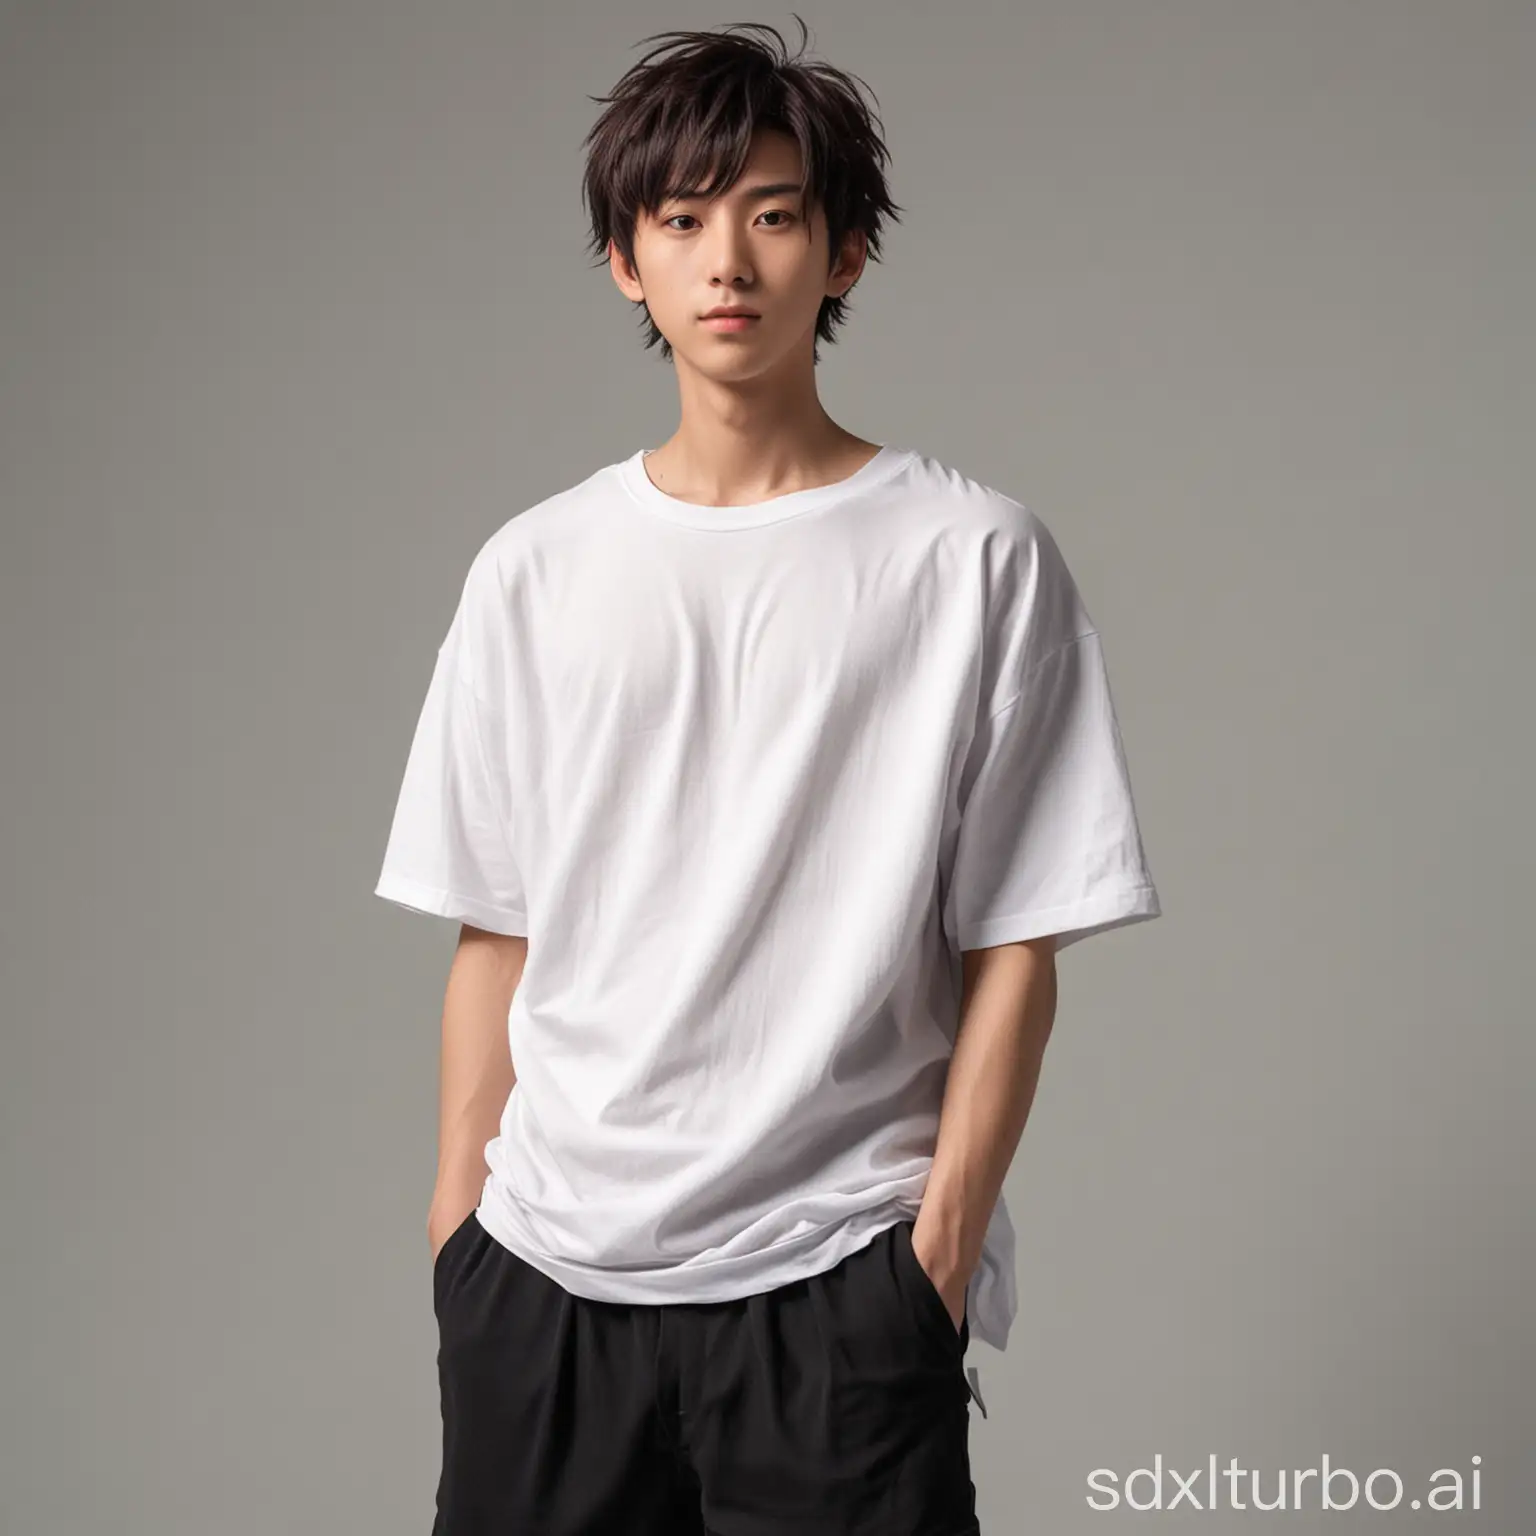 a real life male anime character with good build wearing a plain oversized t shirt posing for a photoshoot